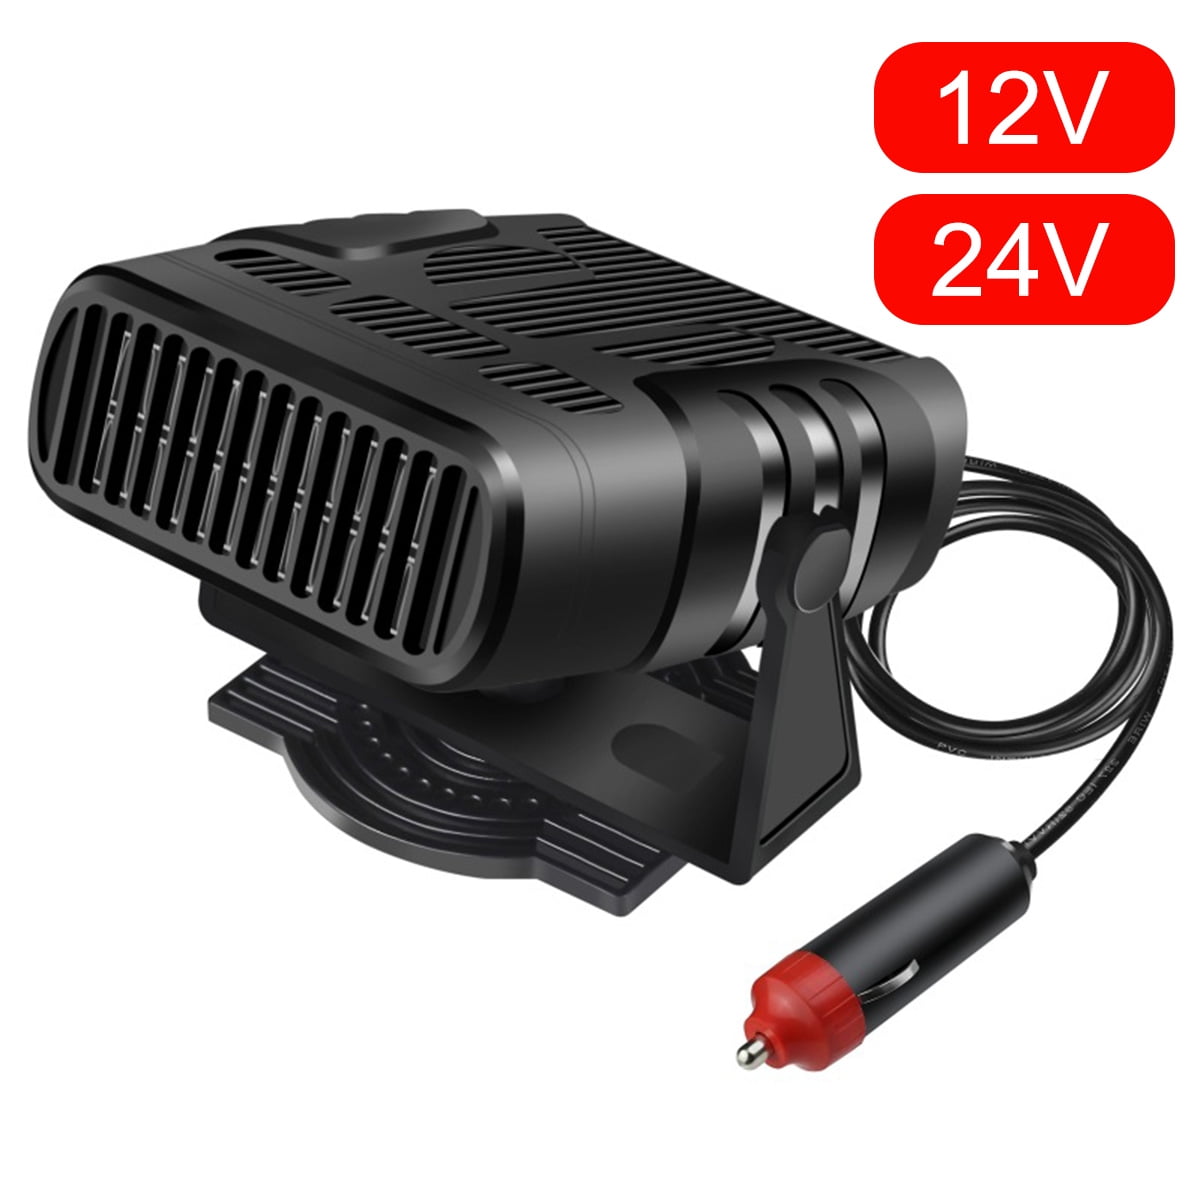 Car Heater,Portable Heater for Auto,Fast Heating Quickly Defrosts Defogger Car Heater 12V 150W Plug in Cig Lighter 